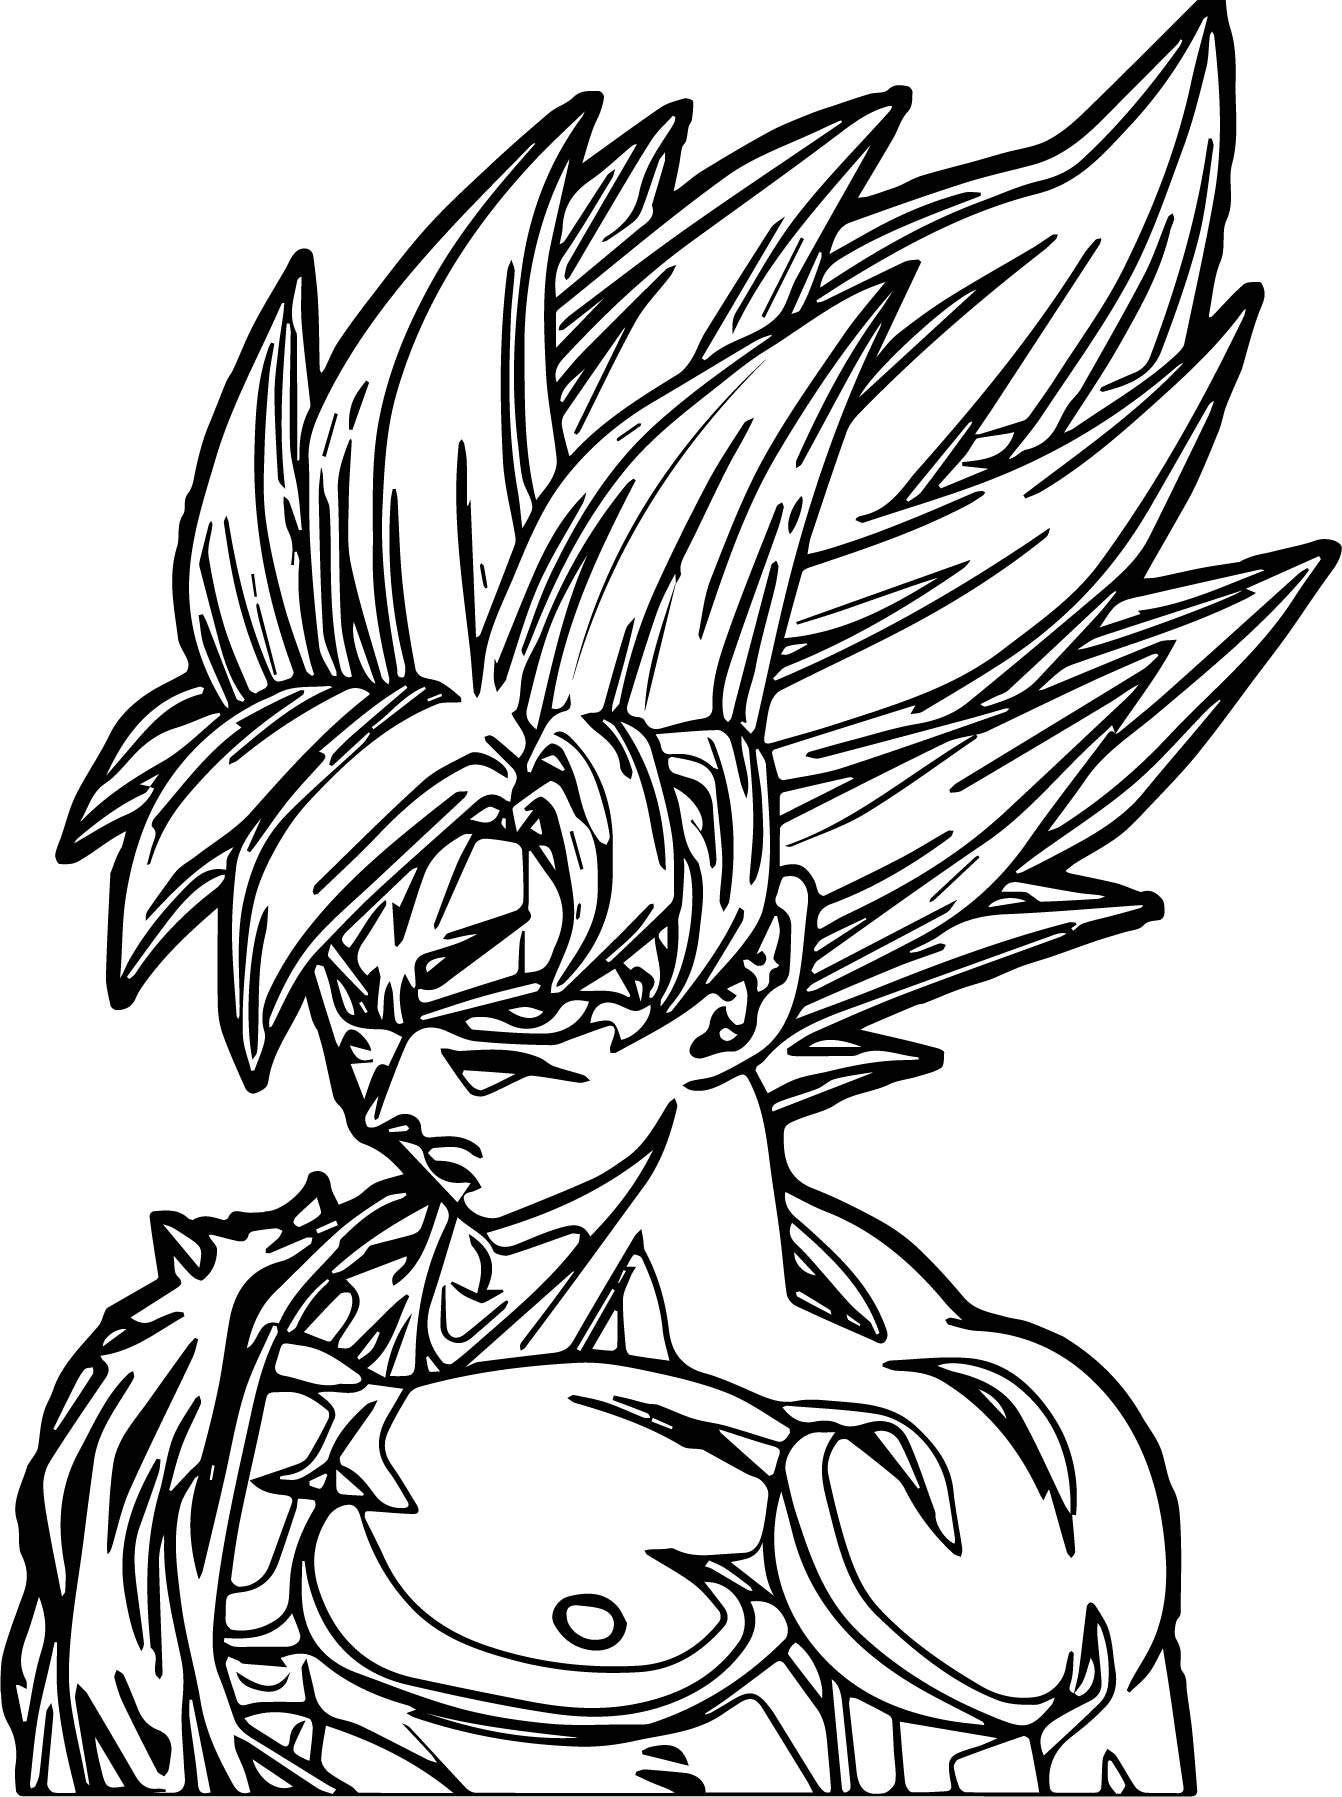 Goku Face Drawing | Free download on ClipArtMag